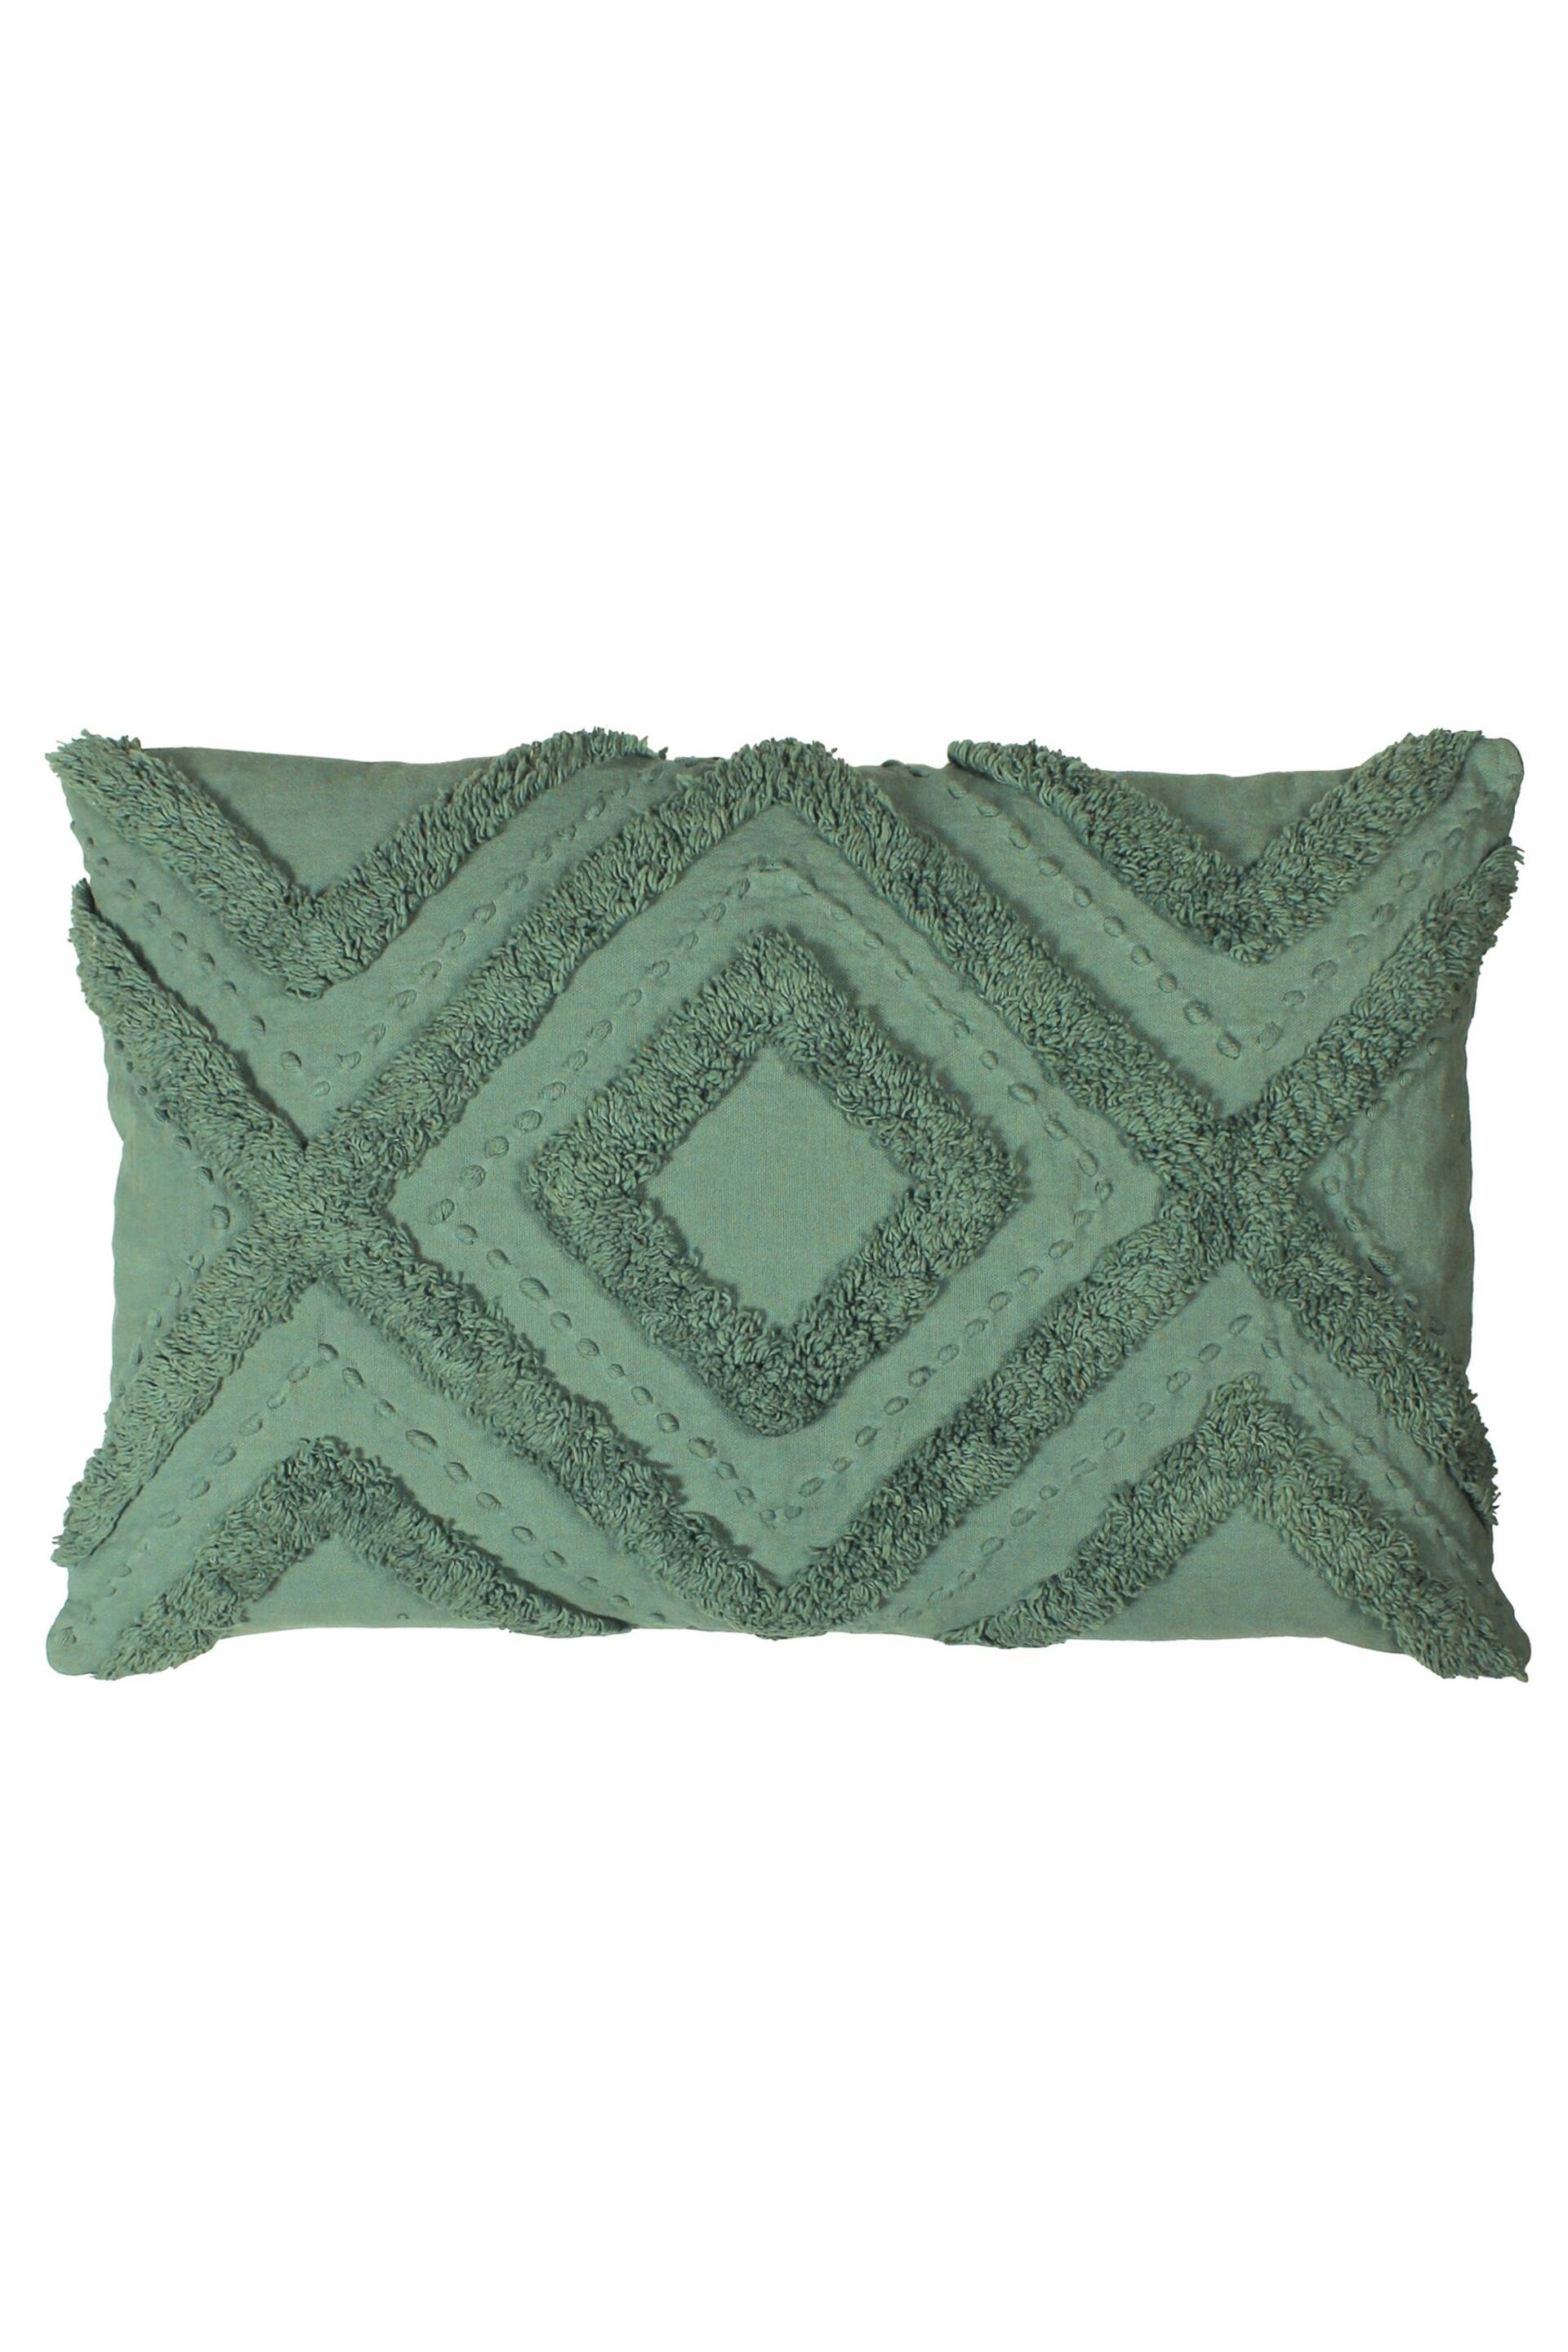 furn. Eucalyptus Green Orson Tufted Polyester Filled Cushion - Image 1 of 3